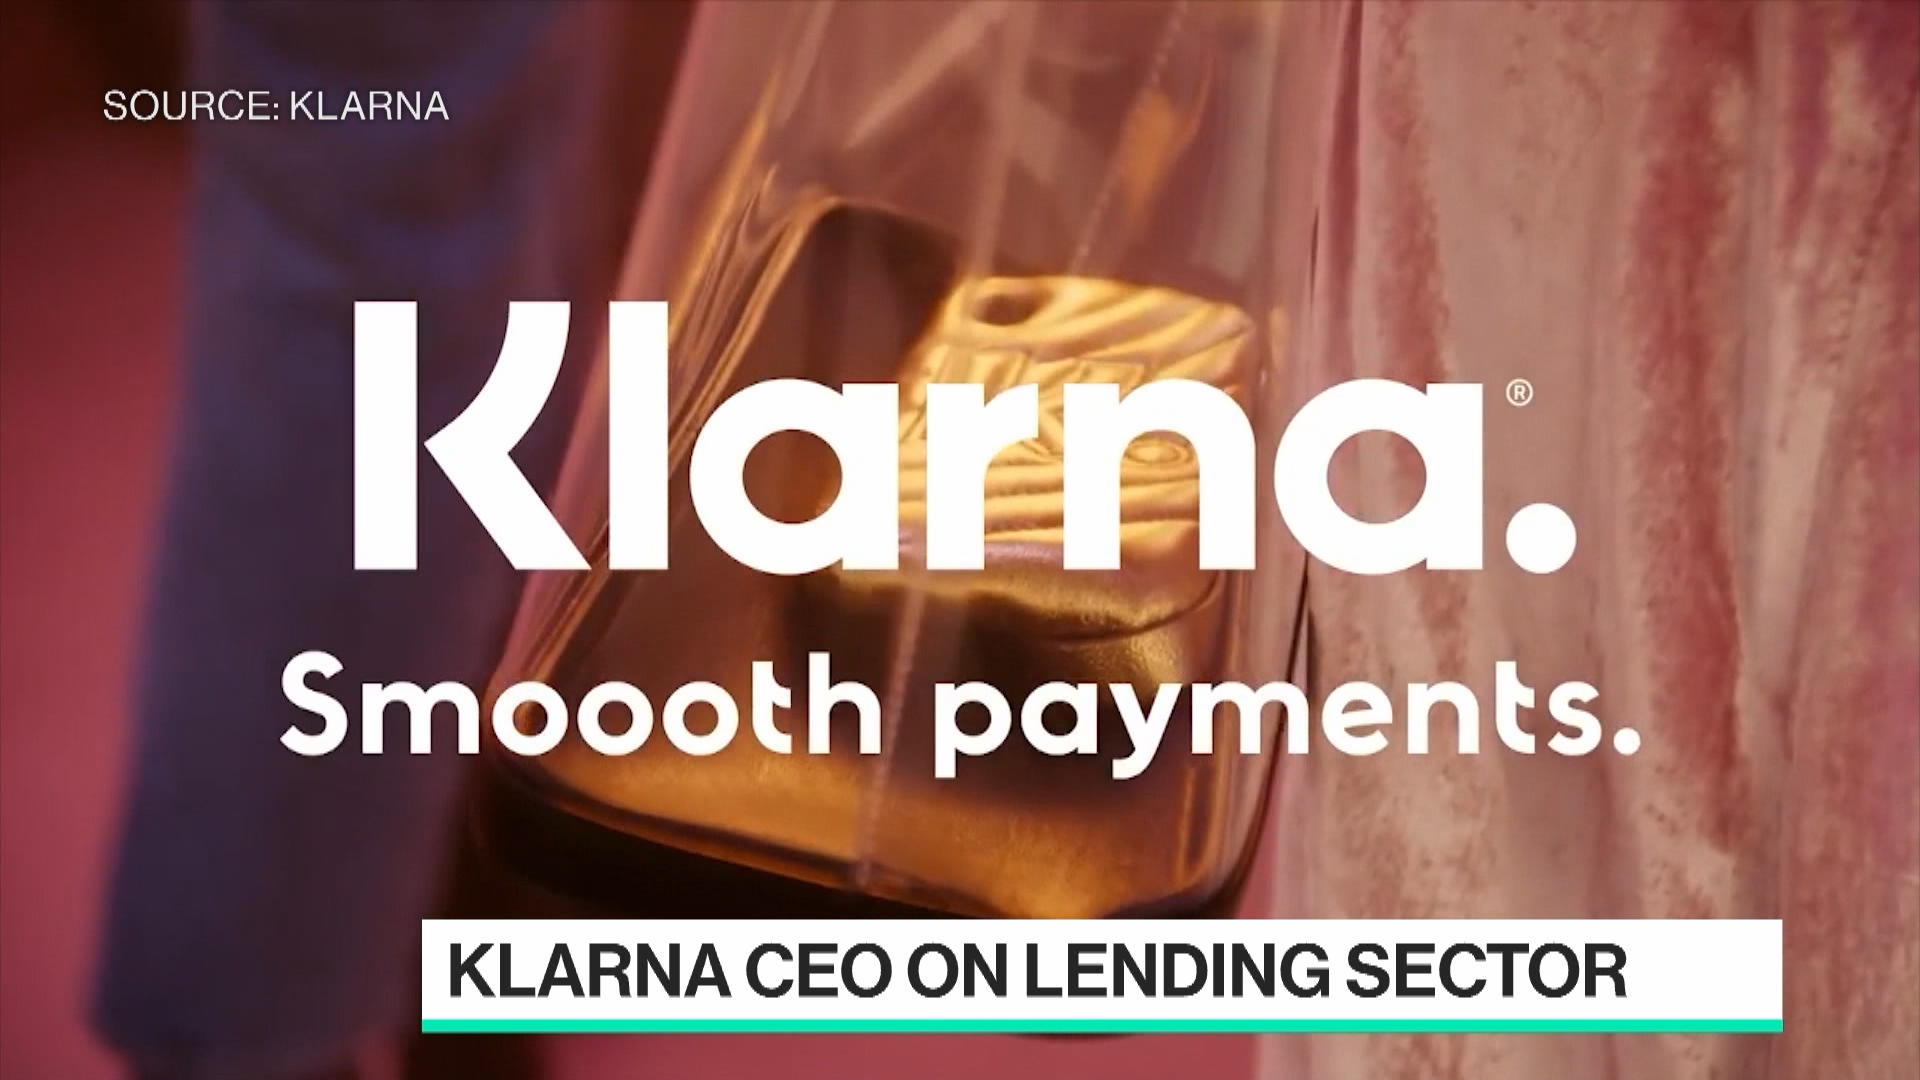 There is Massive Momentum for ‘Buy-Now, Pay Later’: Klarna CEO